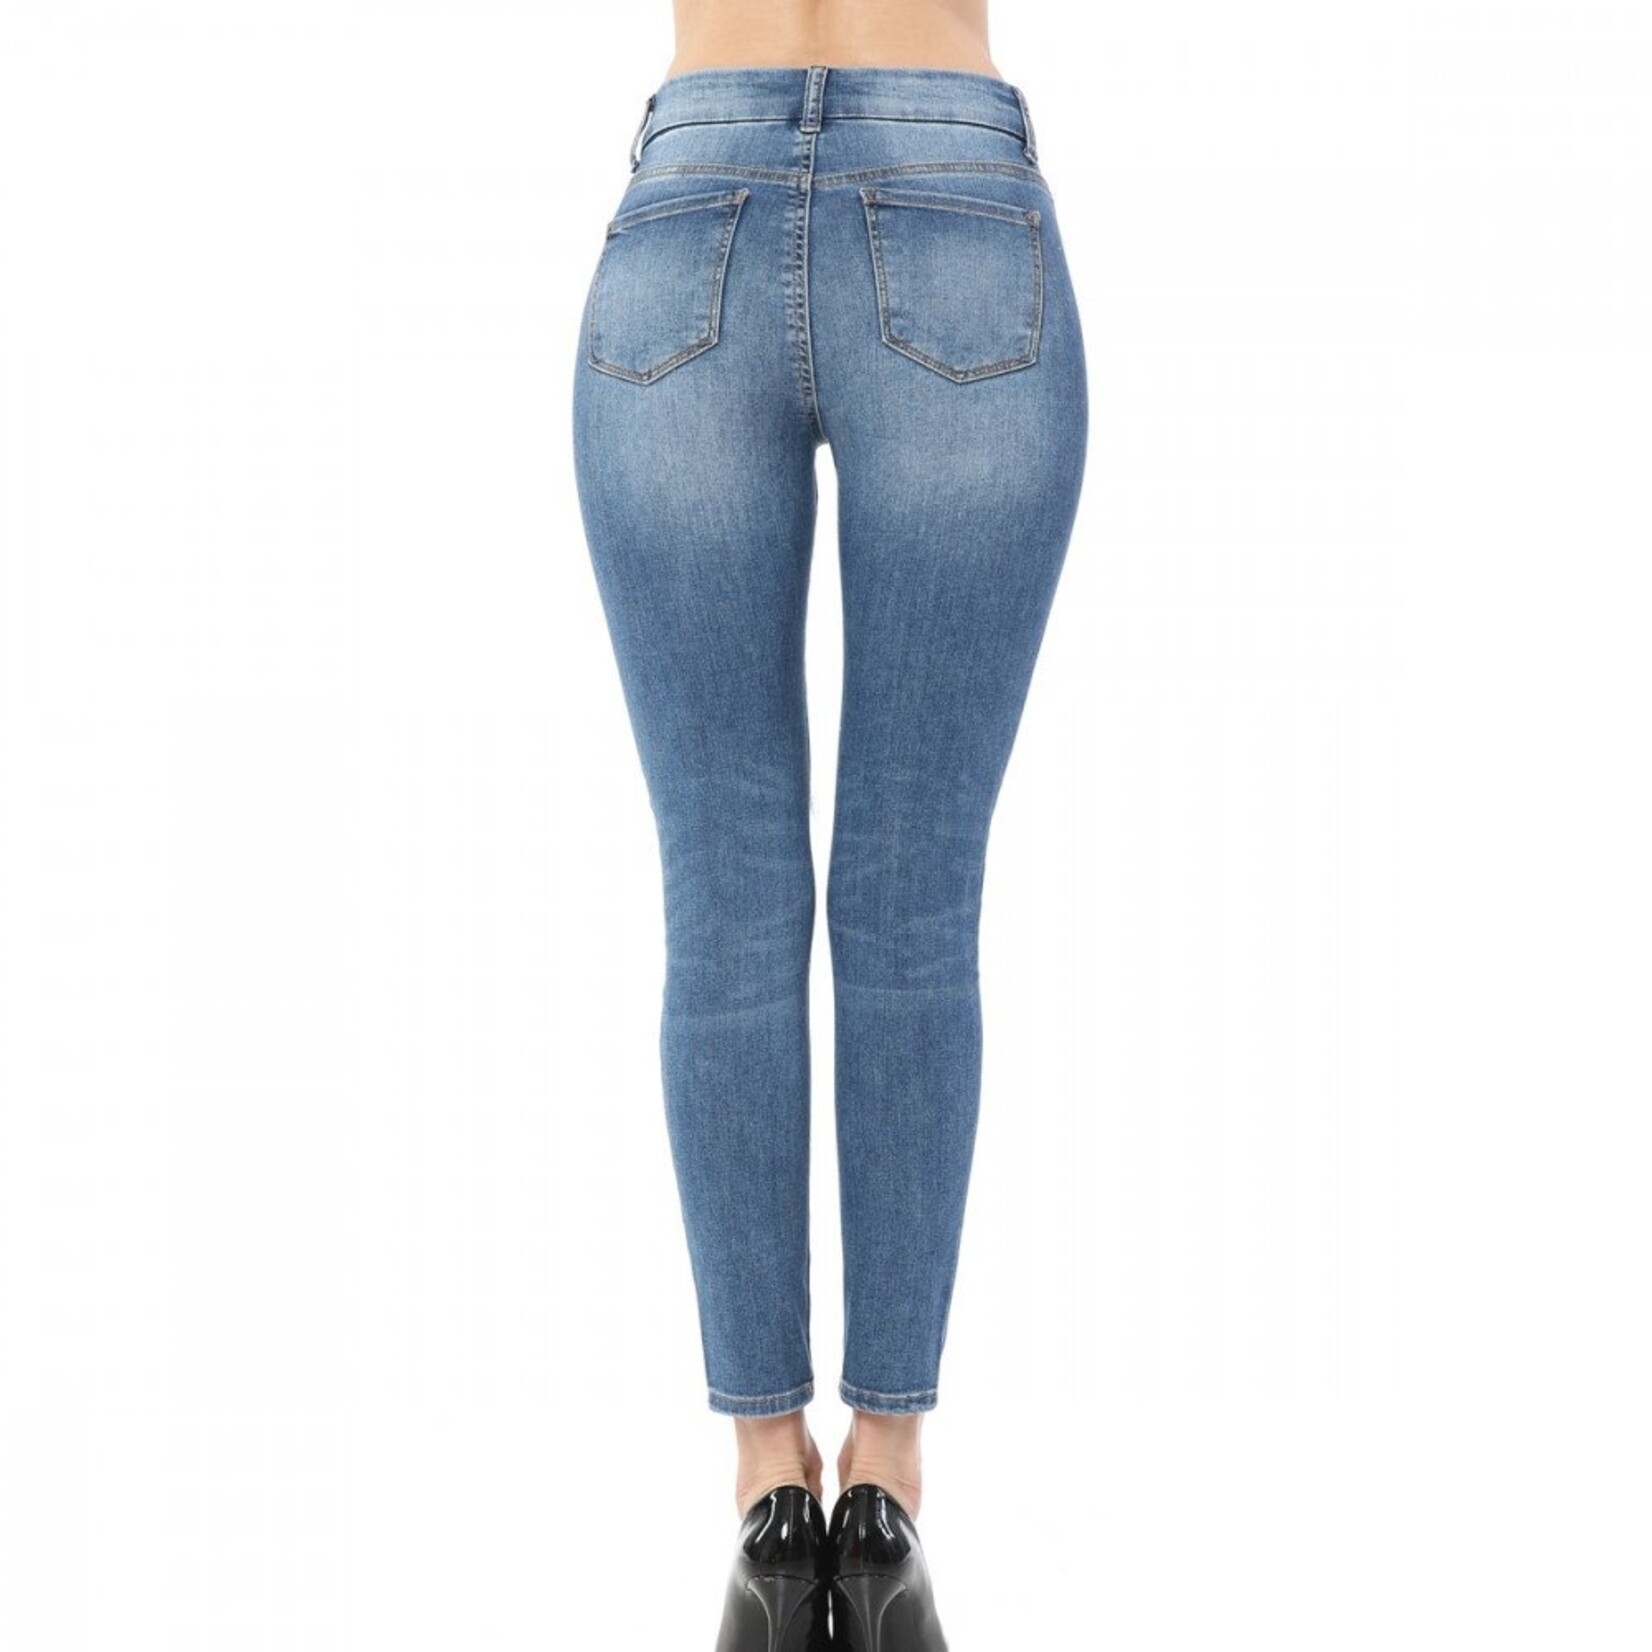 Wax Jeans Women's Sustainable Denim Distressed Jeans - 90225